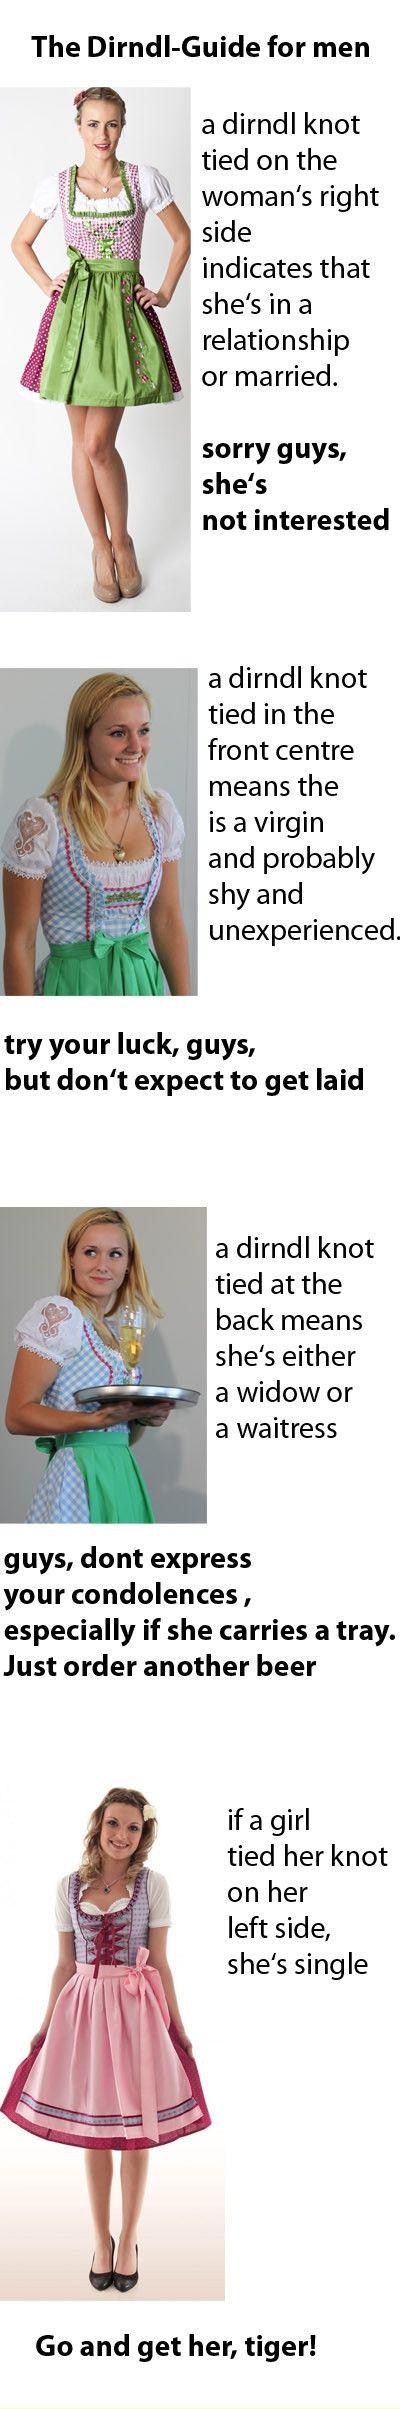 Friendly reminder for all the laides and gents attending Oktoberfest this year